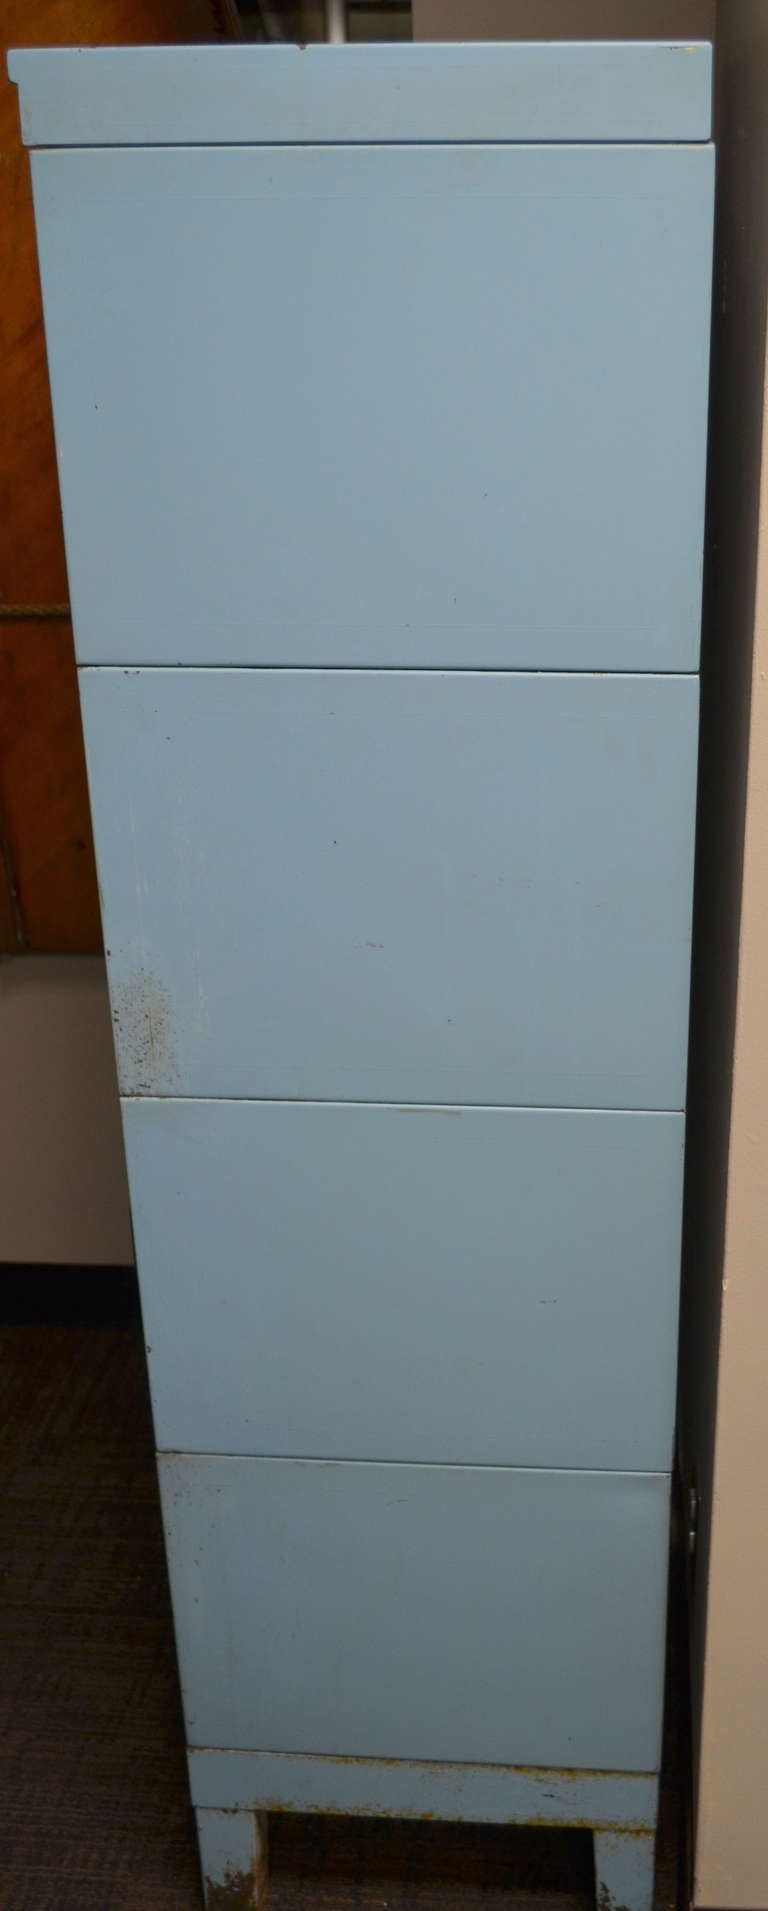 Early 20th century Barrister Cabinet/File System in blue-painted steel 2